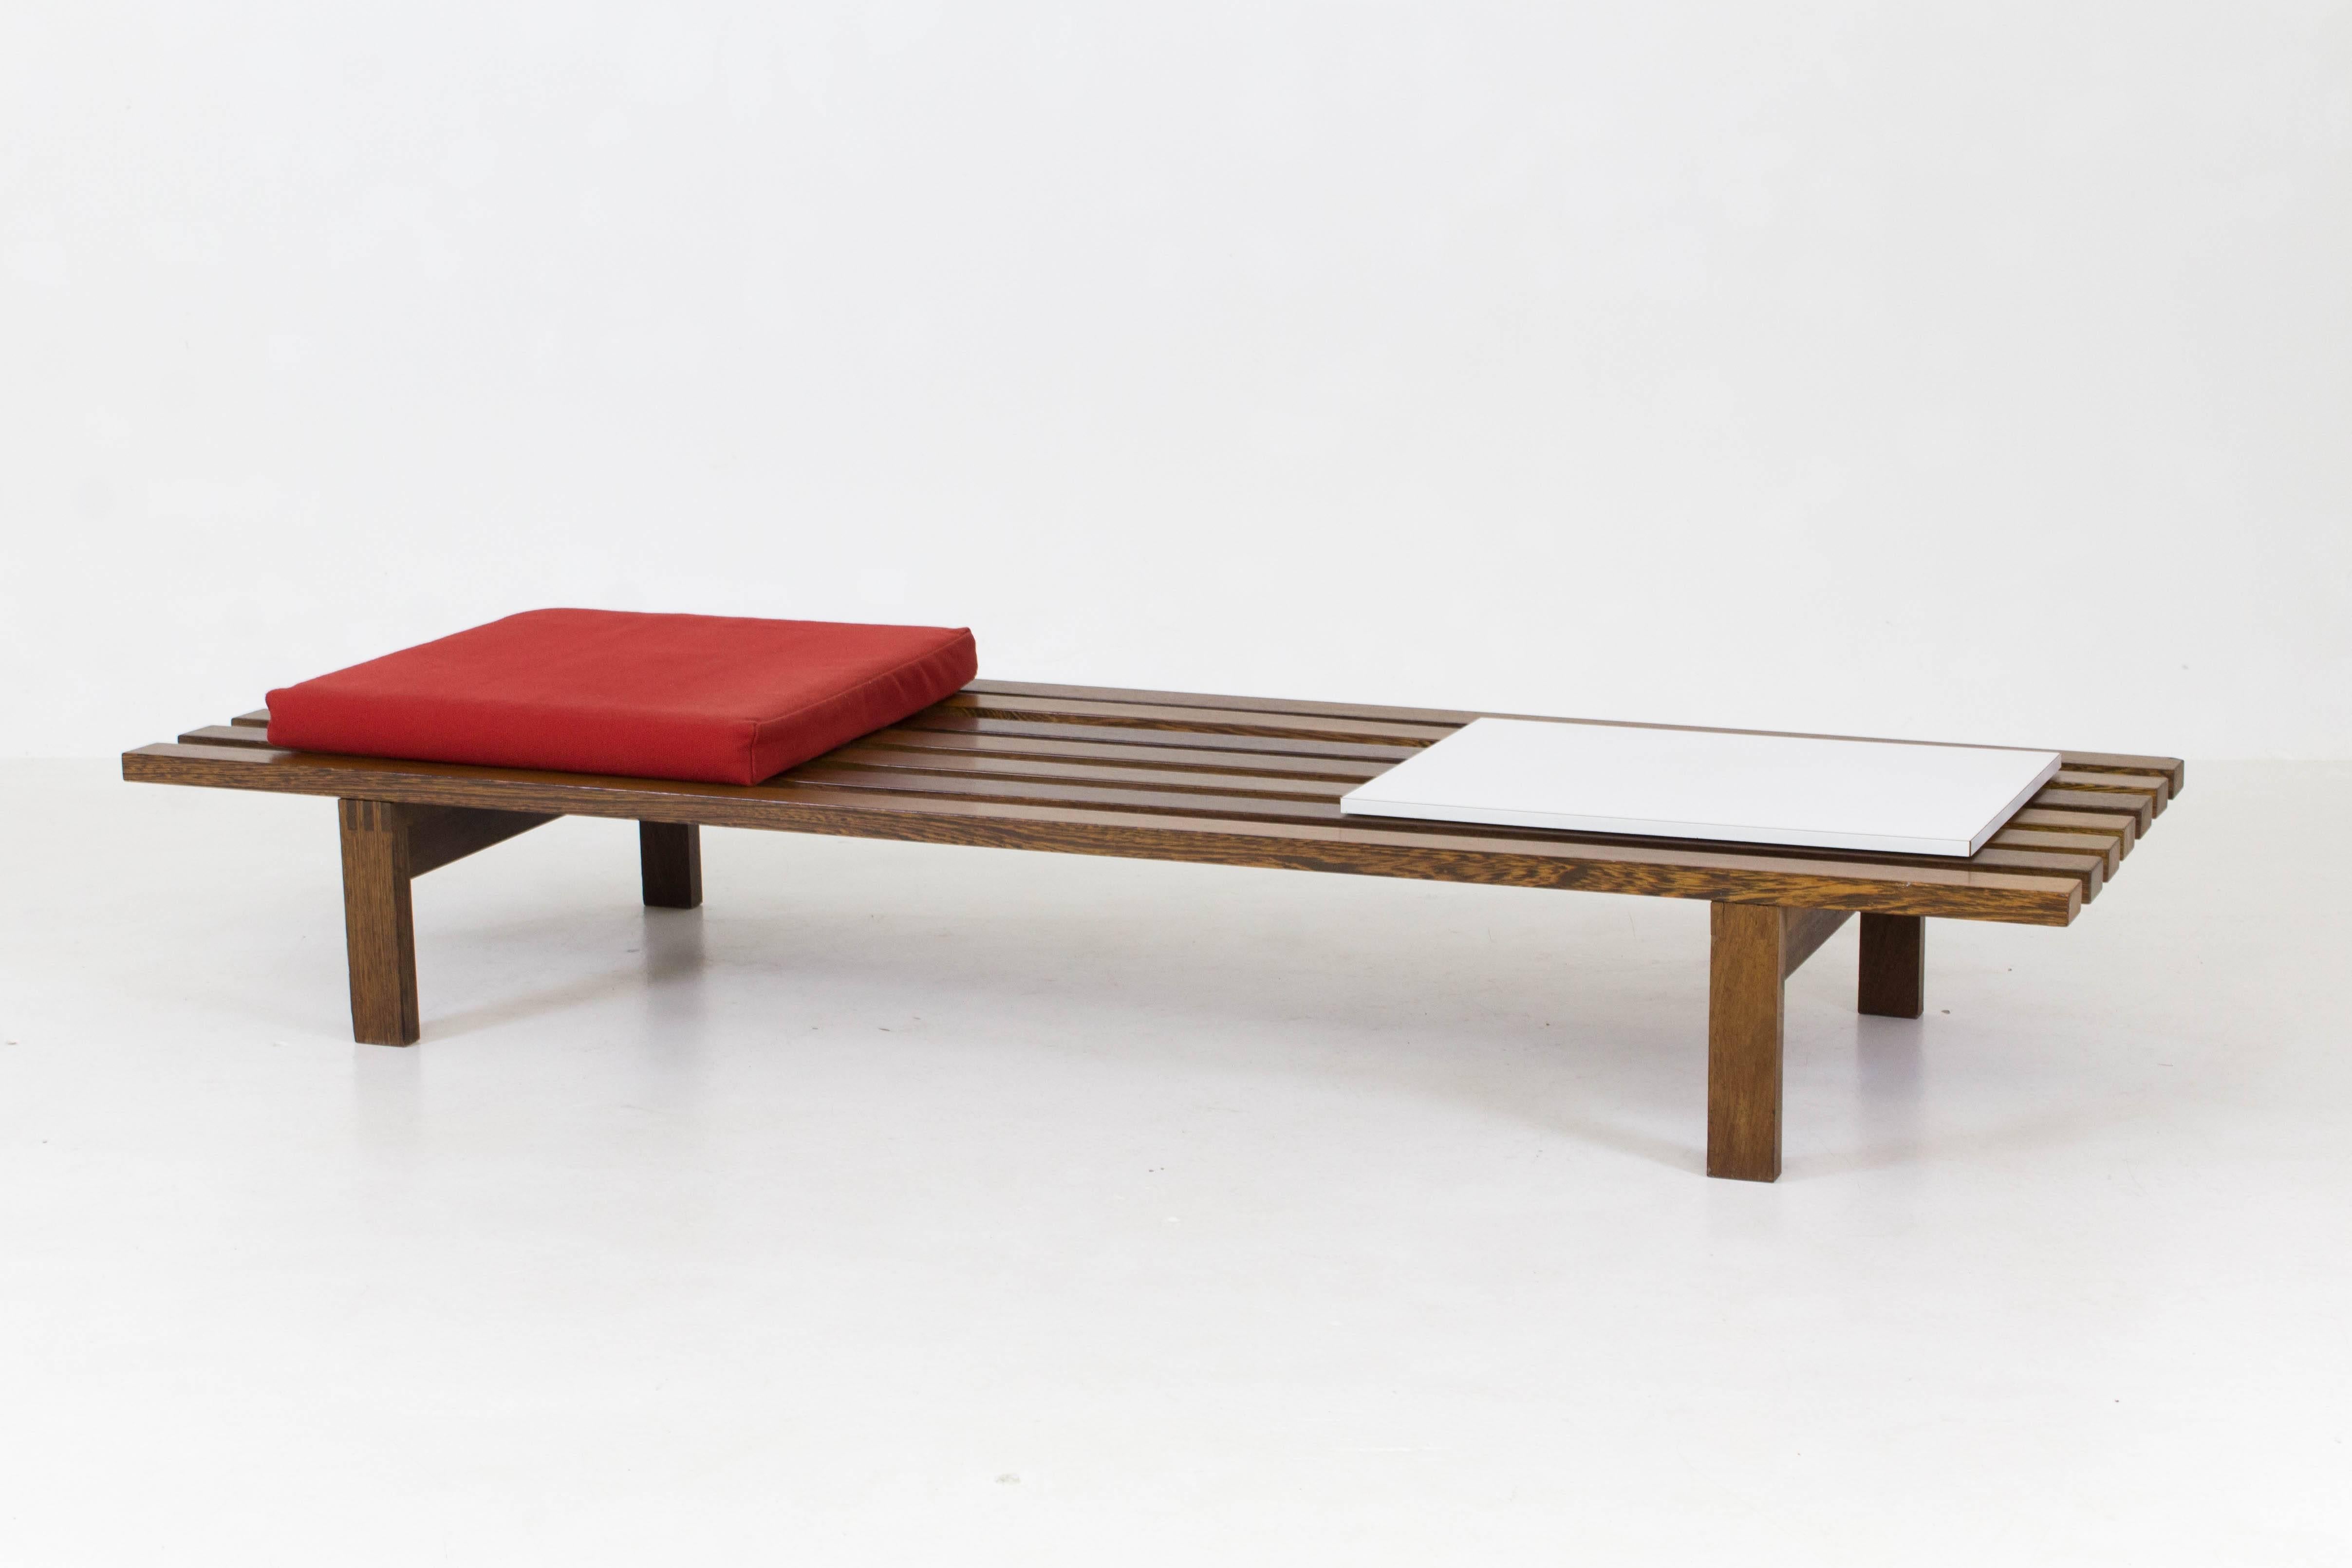 Offered by Amsterdam Modernism:
Large wenge Mid-Century Modern slat bench by Martin Visser for 't Spectrum, 1960s.
This is the rare version with original cushion and sliding laminated shelf.
Marked with manufacturers label underneath the sliding